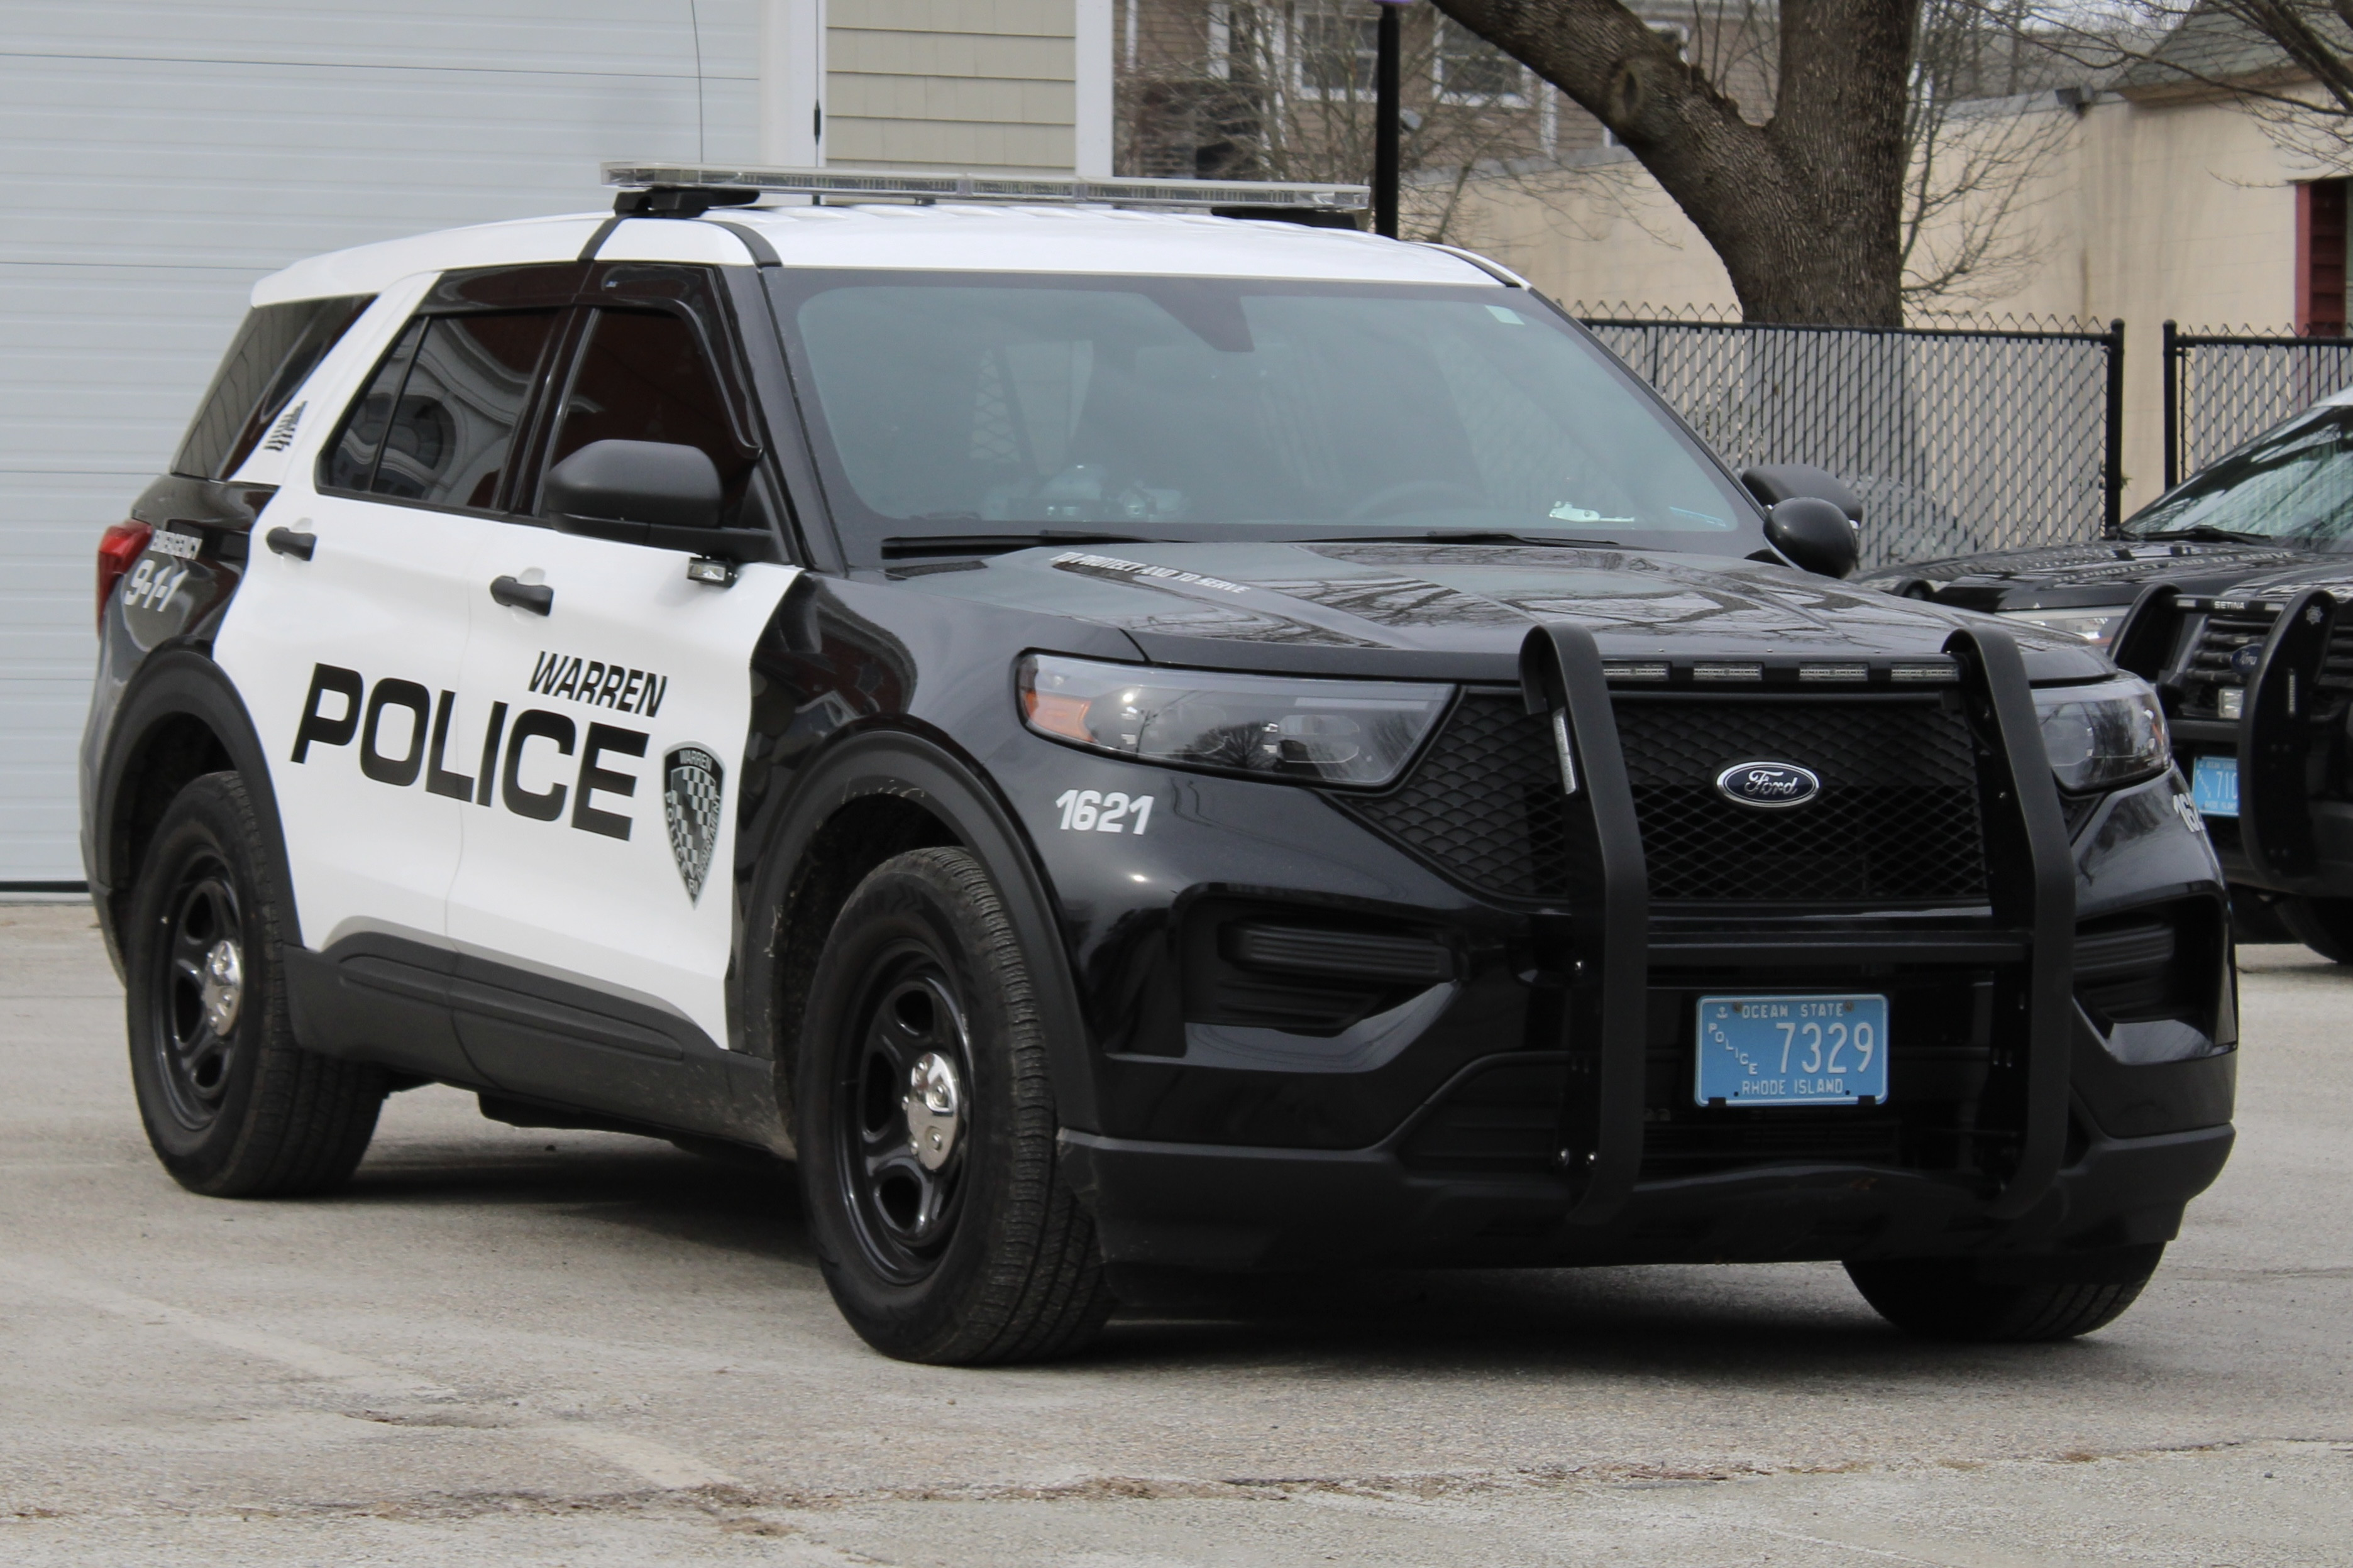 A photo  of Warren Police
            Cruiser 1621, a 2021 Ford Police Interceptor Utility             taken by @riemergencyvehicles